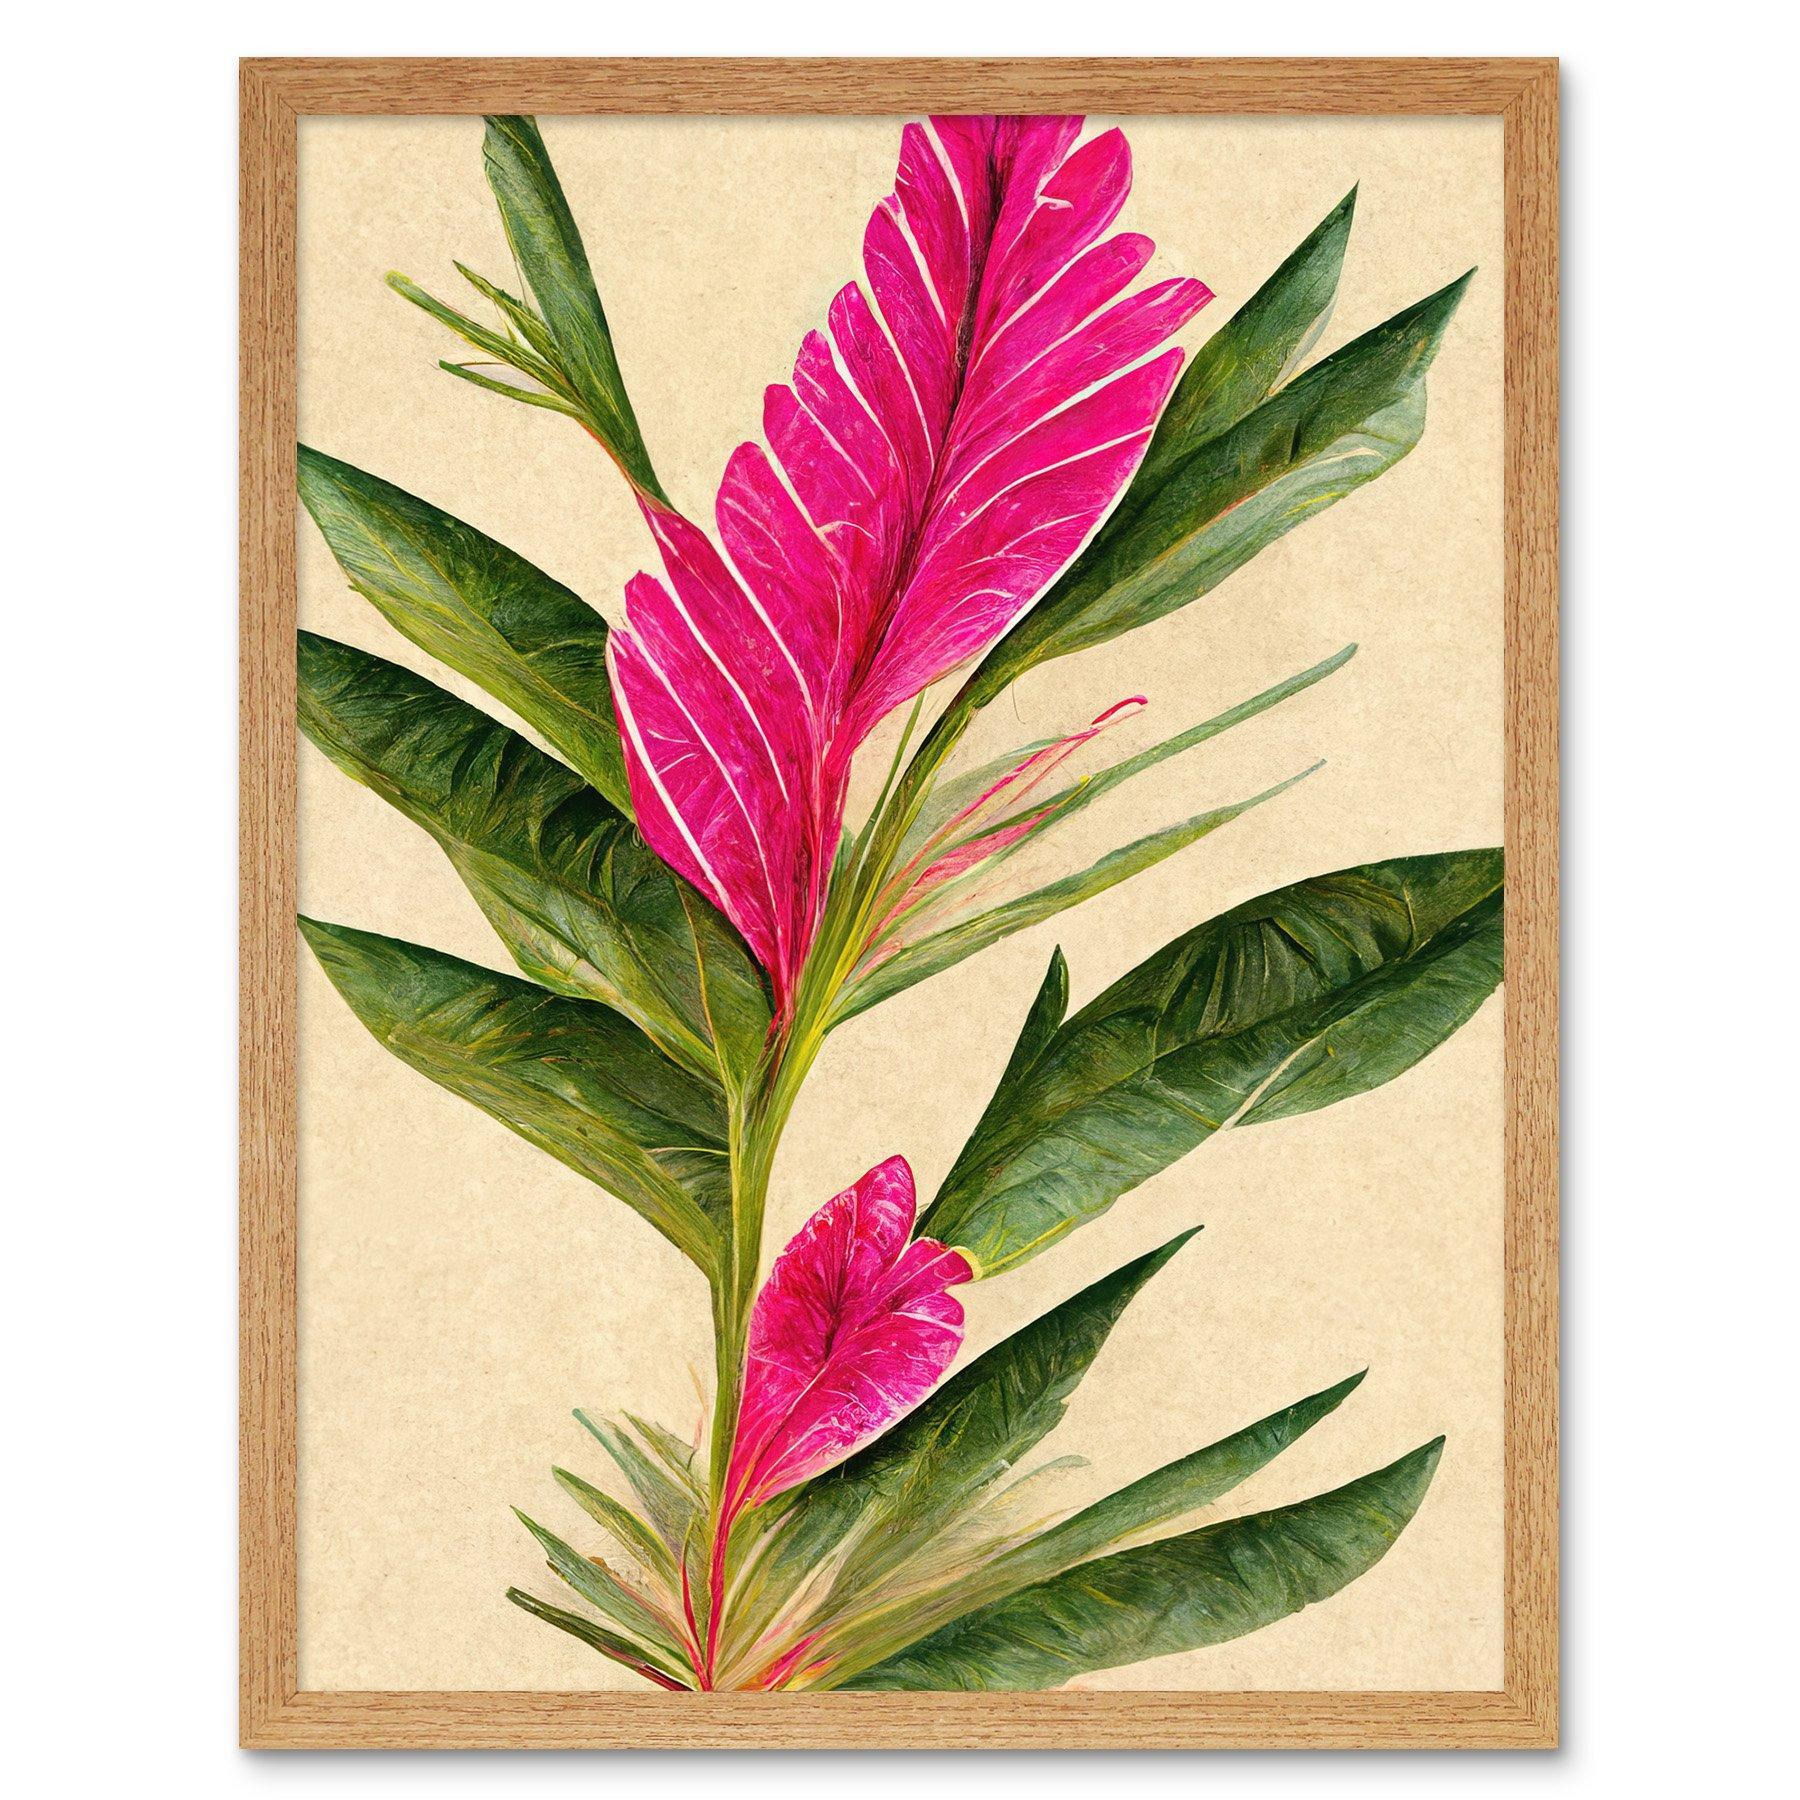 Hawaiian Flower Leaves Illustration In Fuchsia And Green Art Print Framed Poster Wall Decor 12x16 inch - image 1